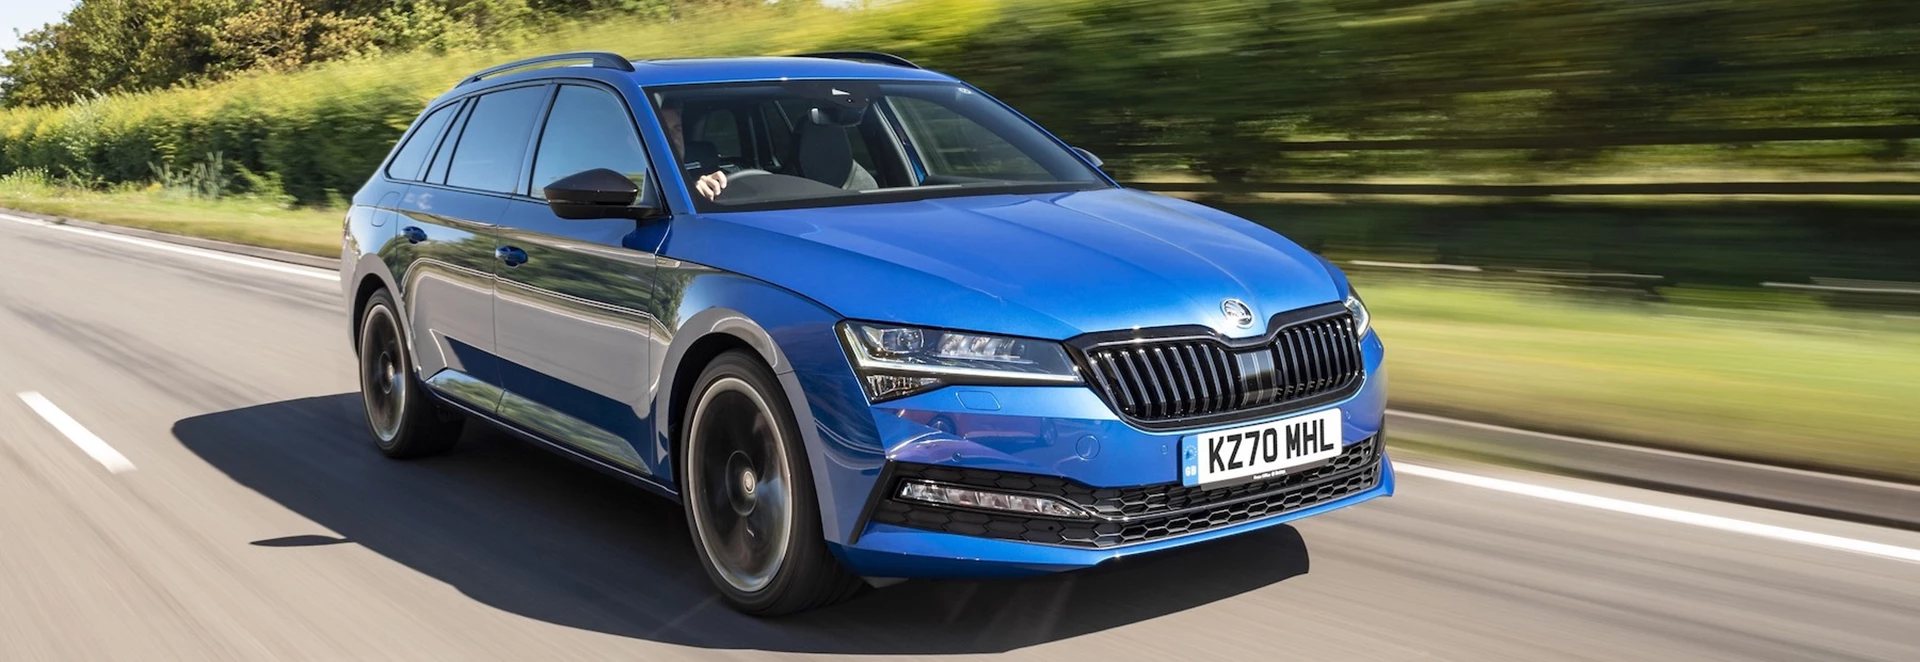 Buyer’s guide to the 2021 Skoda Superb 